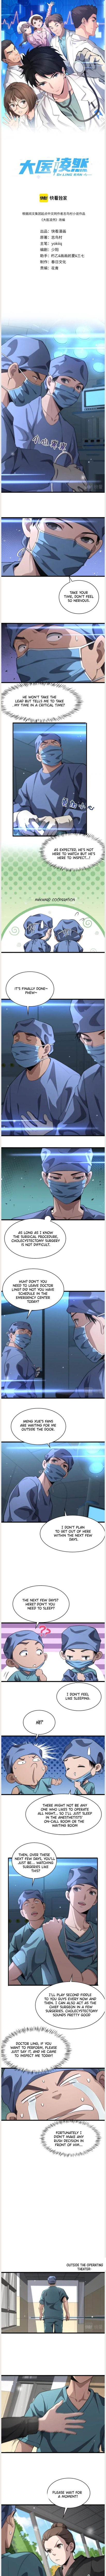 great_doctor_ling_ran_162_1